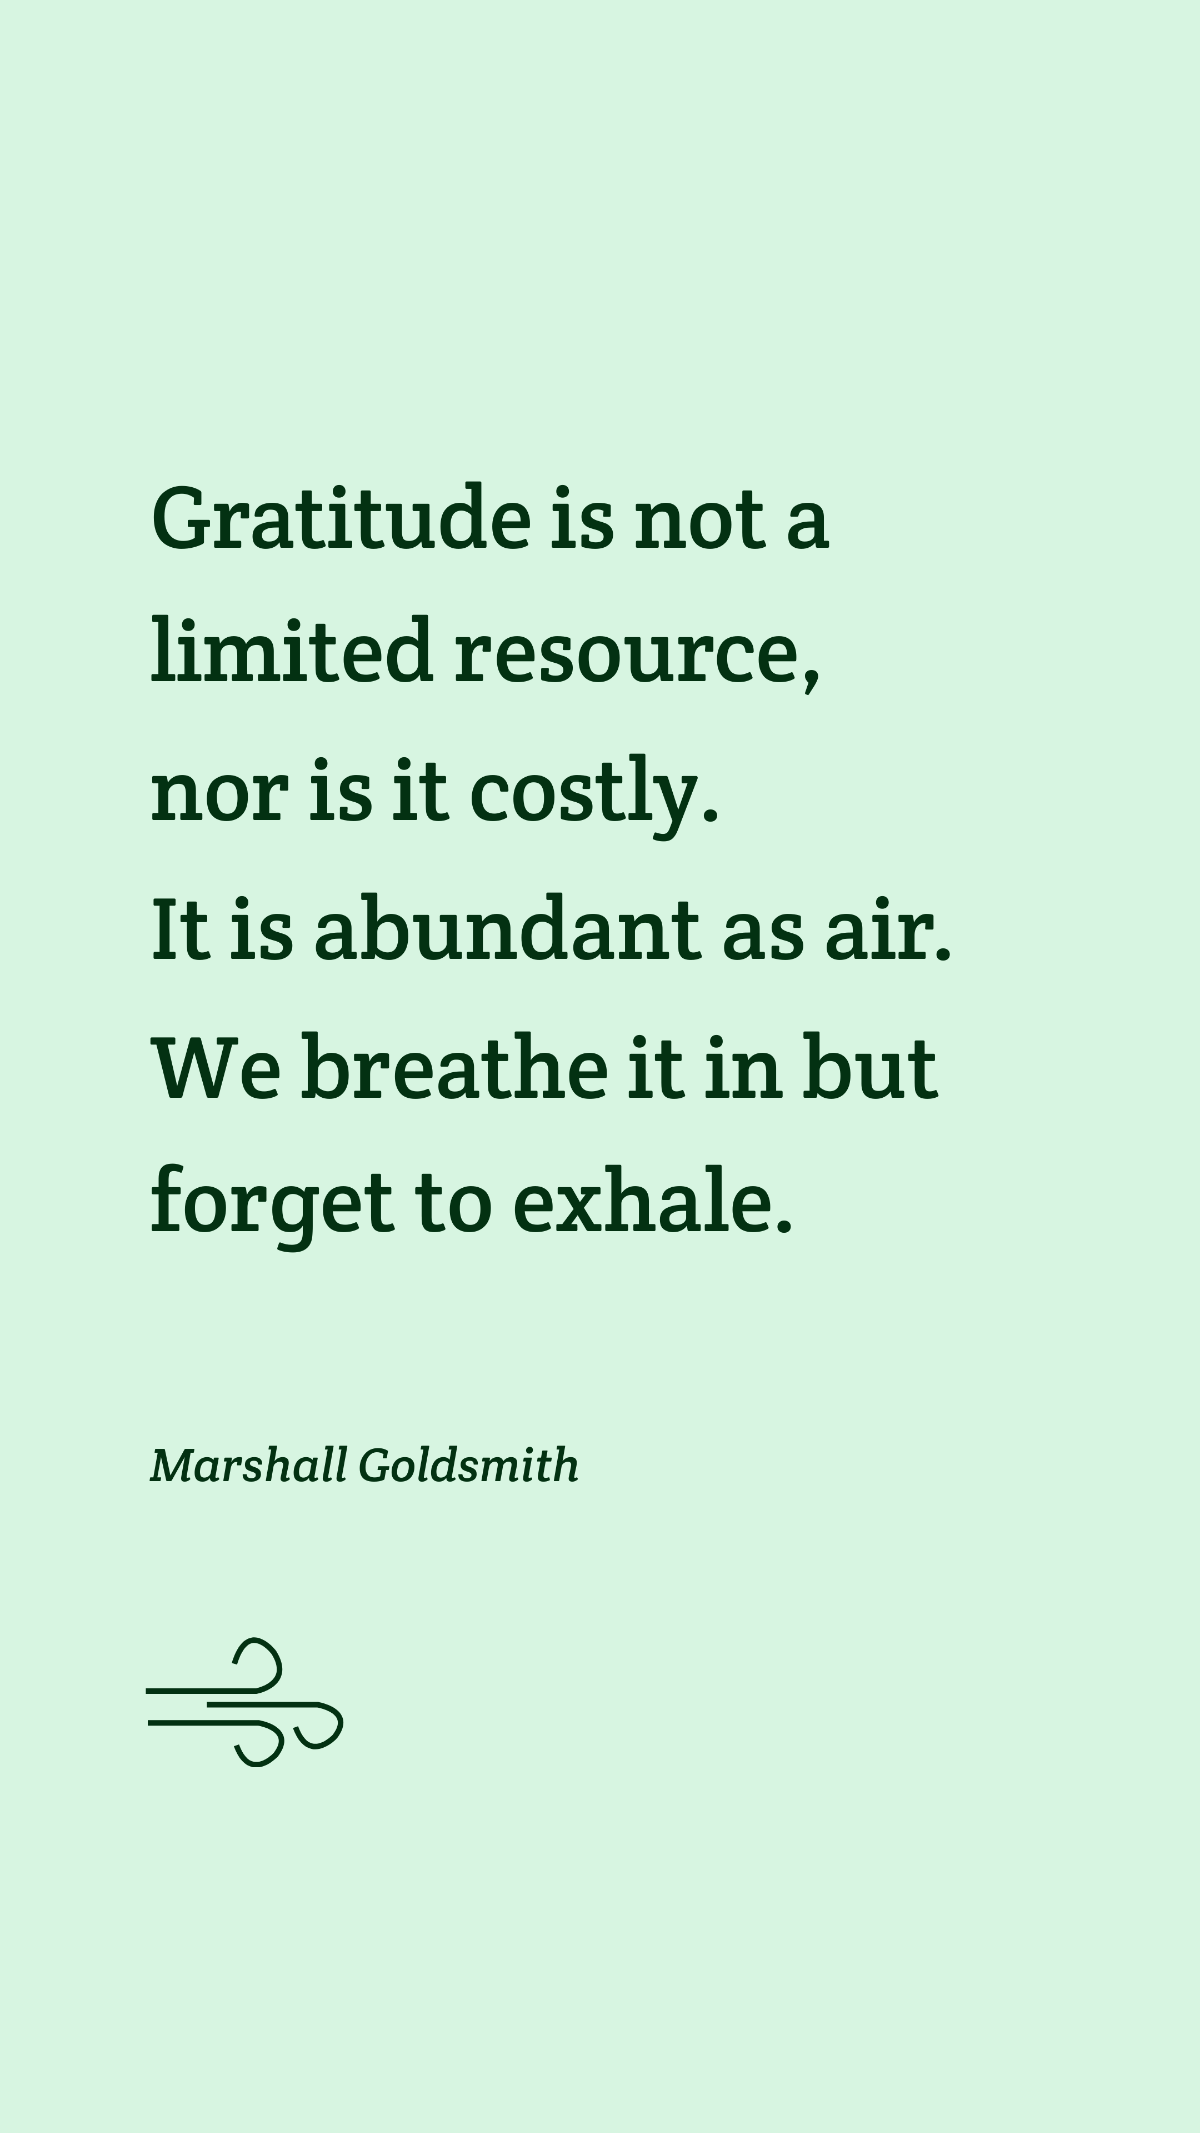 Marshall Goldsmith - Gratitude is not a limited resource, nor is it costly. It is abundant as air. We breathe it in but forget to exhale. Template